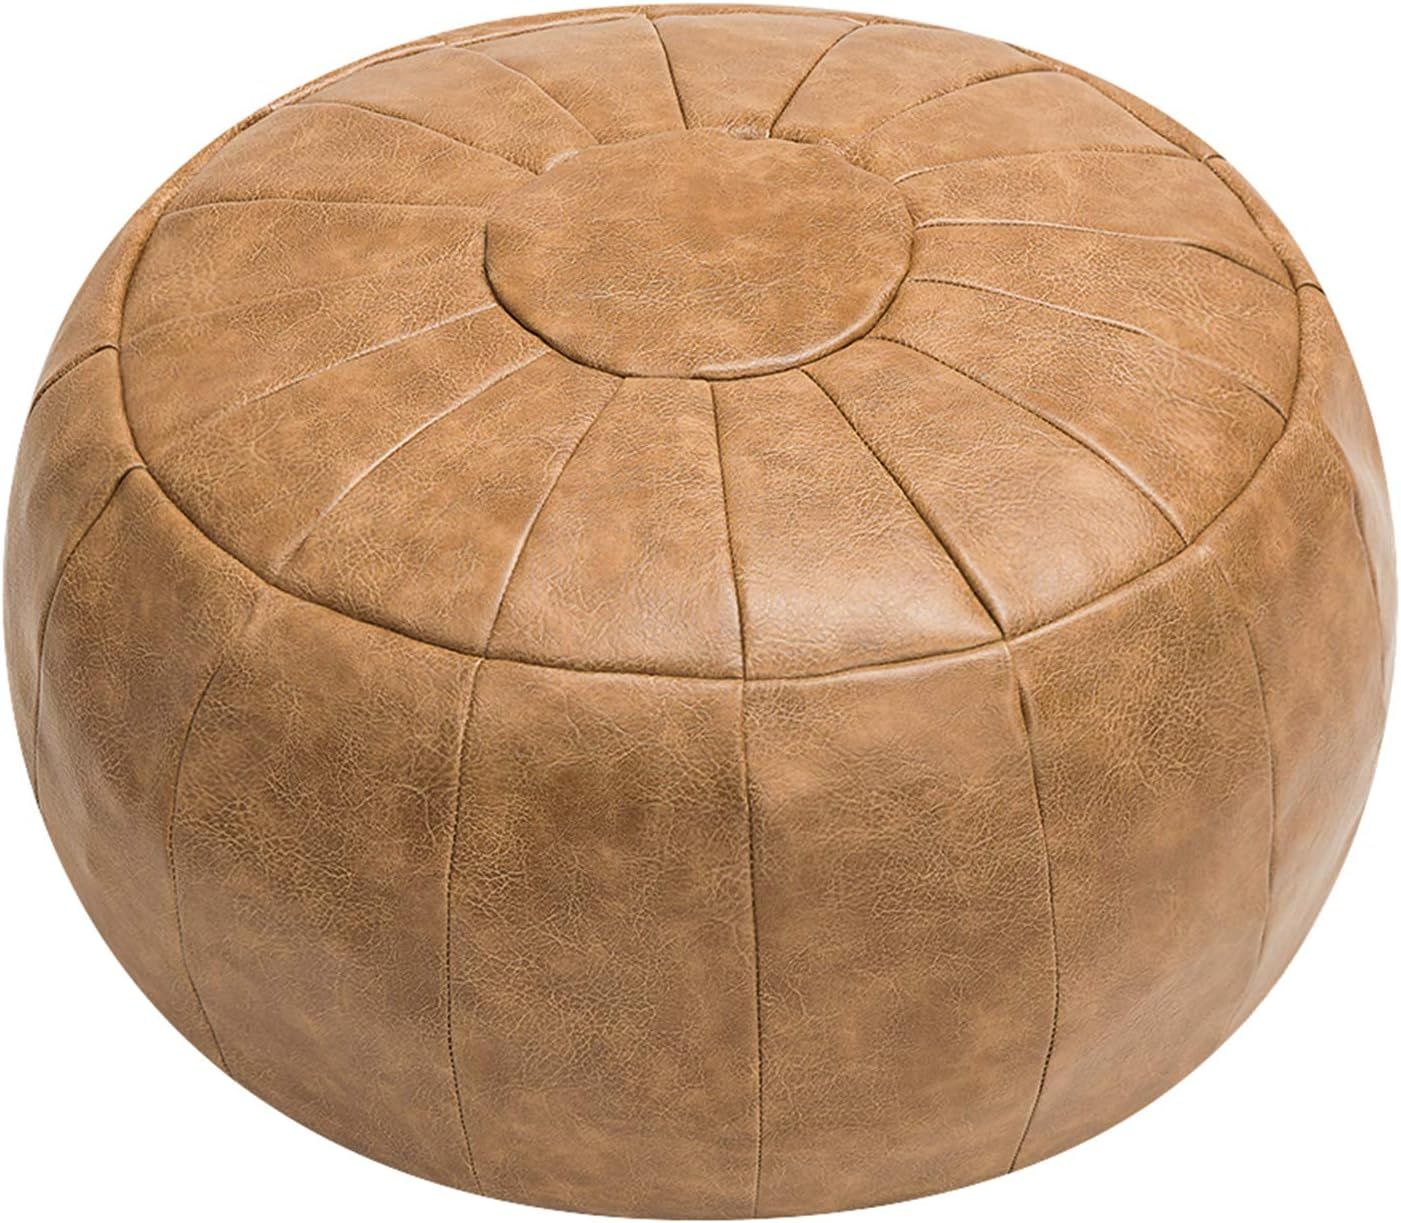 ROTOT Unstuffed Pouf Cover, Ottoman, Bean Bag Chair, Foot Stool, Foot Rest, Storage Solution or W... | Amazon (US)